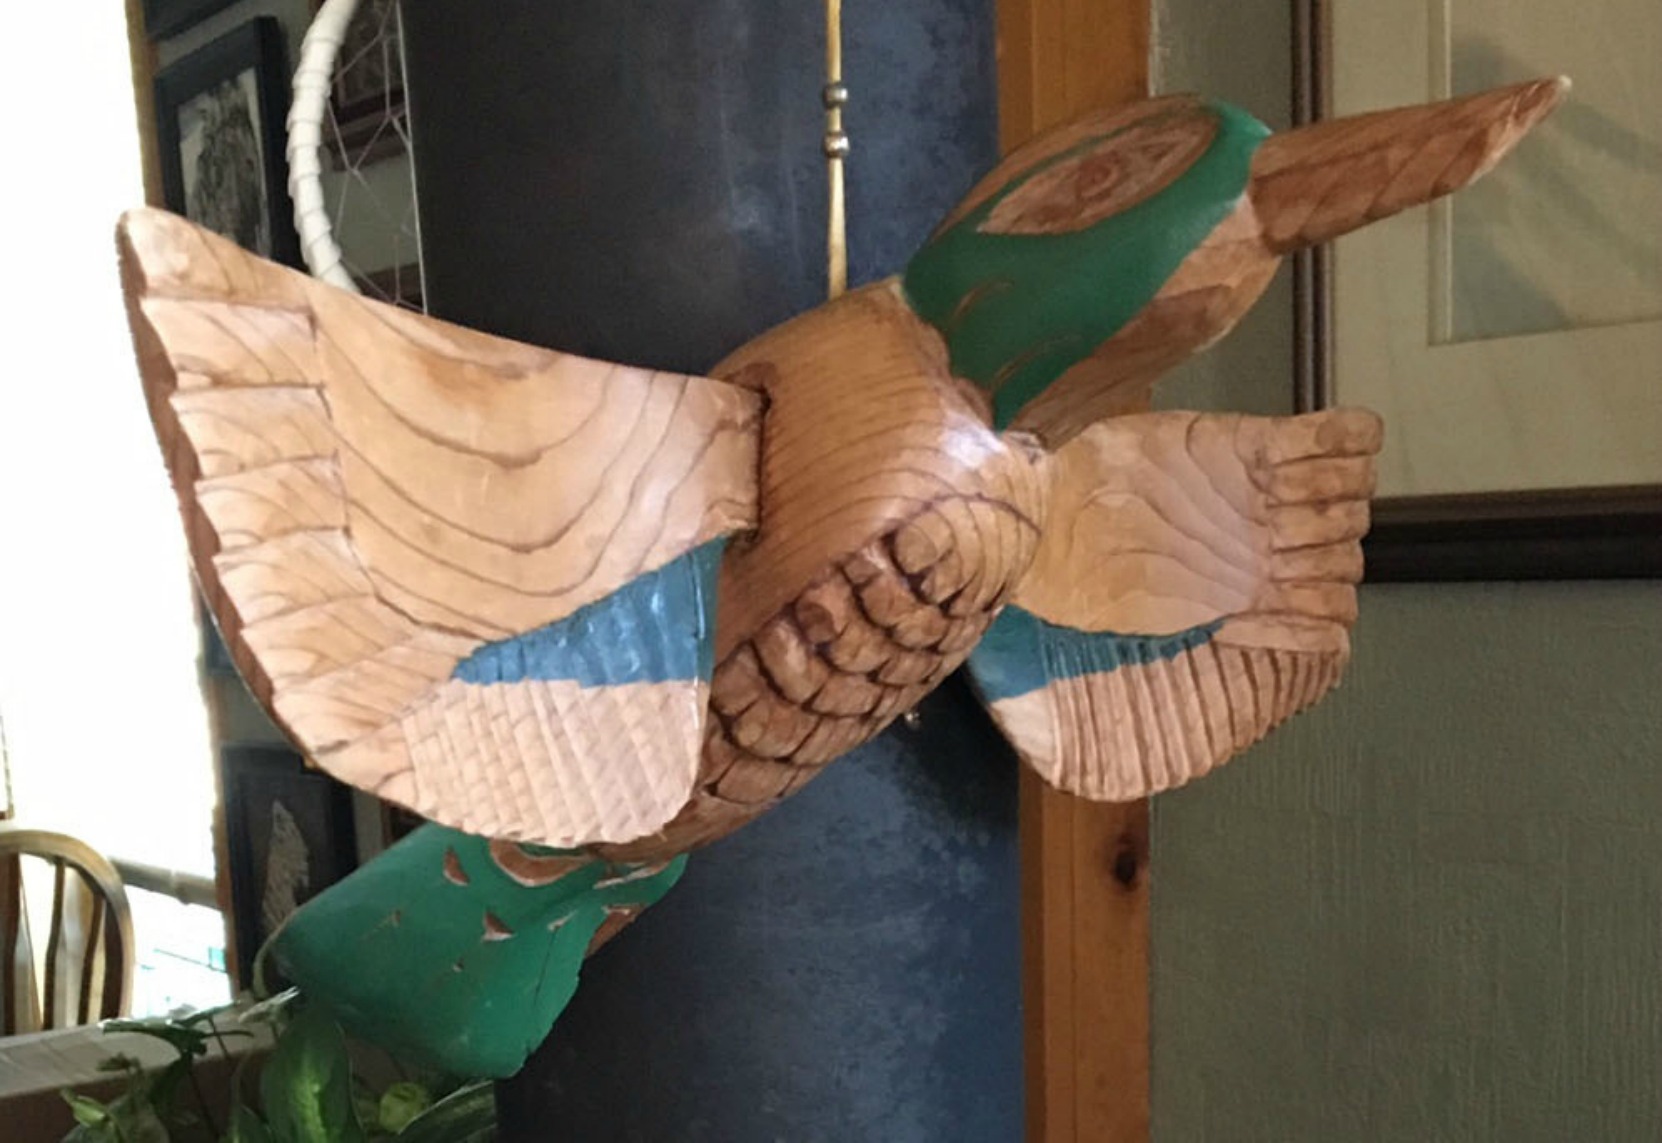 Carol Sanders provided us with this photo of a Simon Charlie Hummingbird carving she purchased from Simon Charlie in the 1990's (photo: Carol Sanders, Blue Eagle Gallery, used with permission)